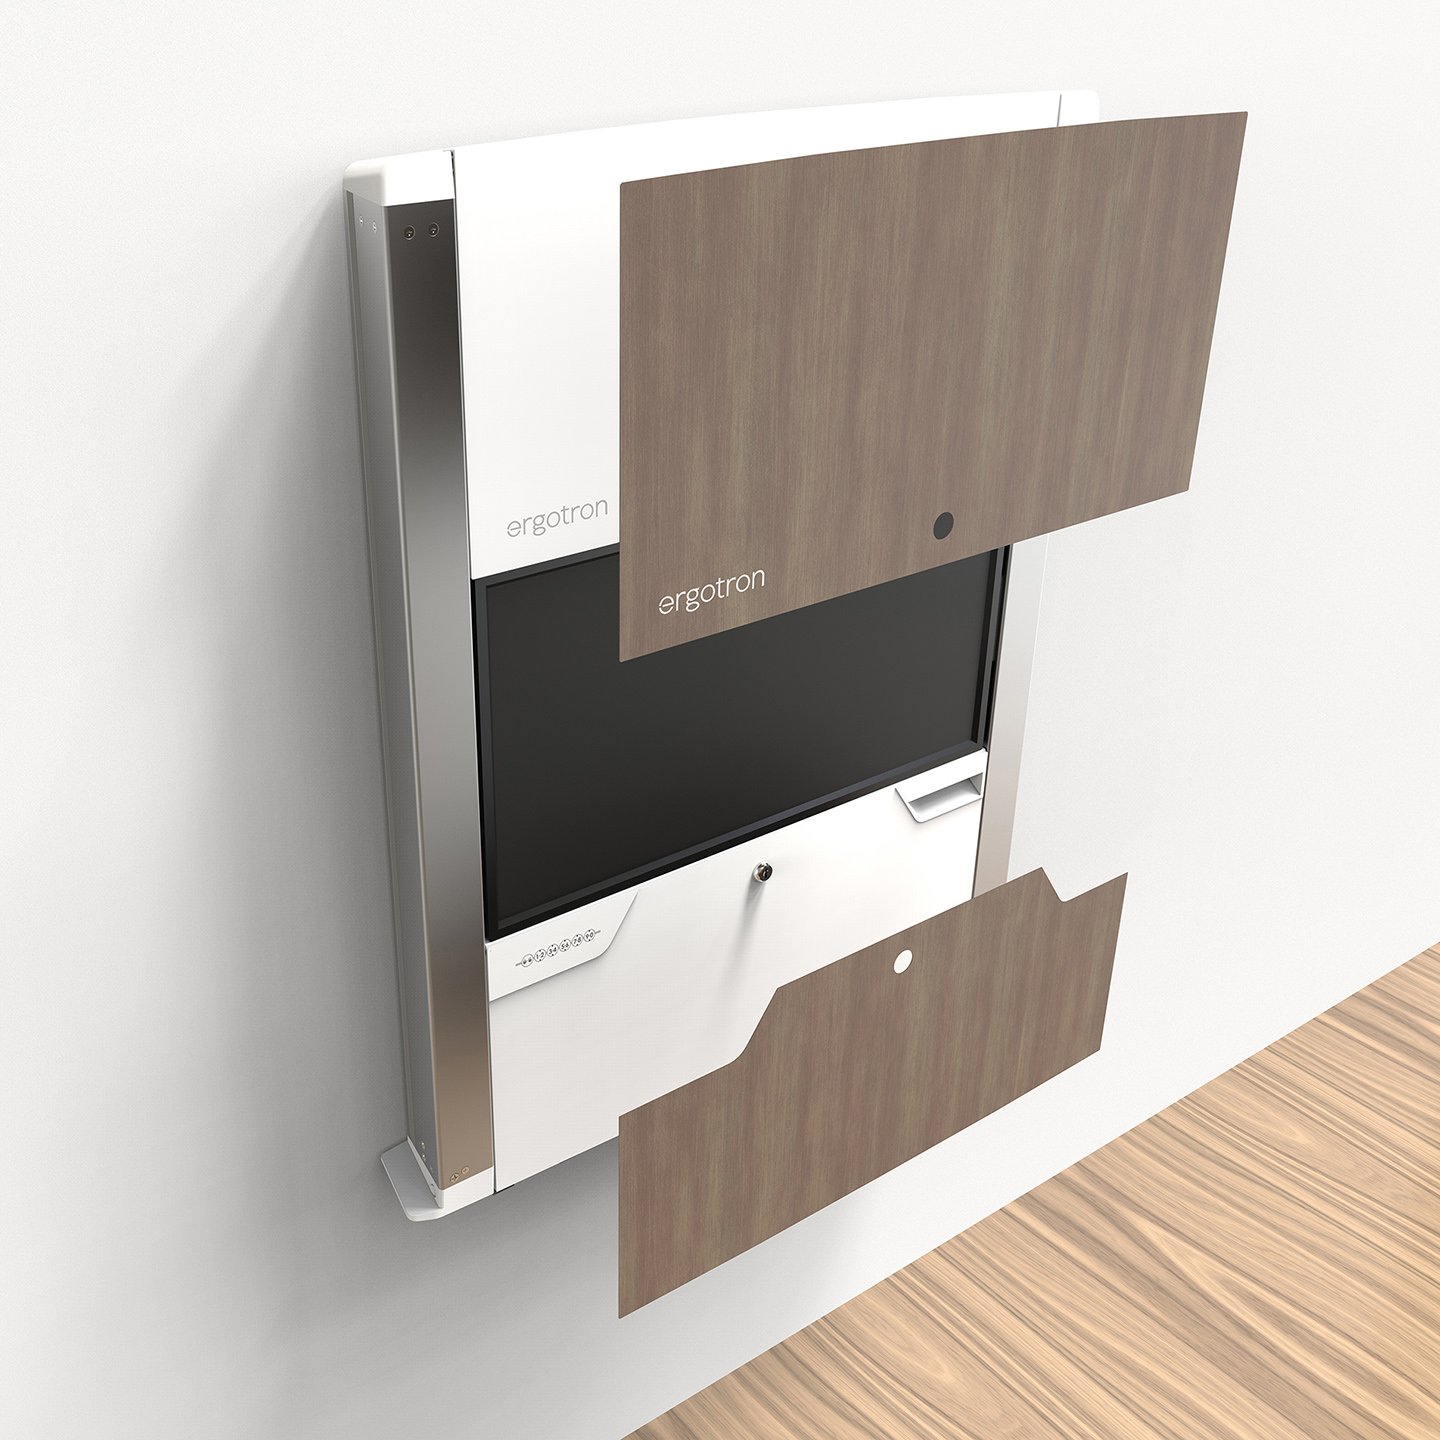 Haworth Carefit Enclosure Workspace with wood exterior against a white wall